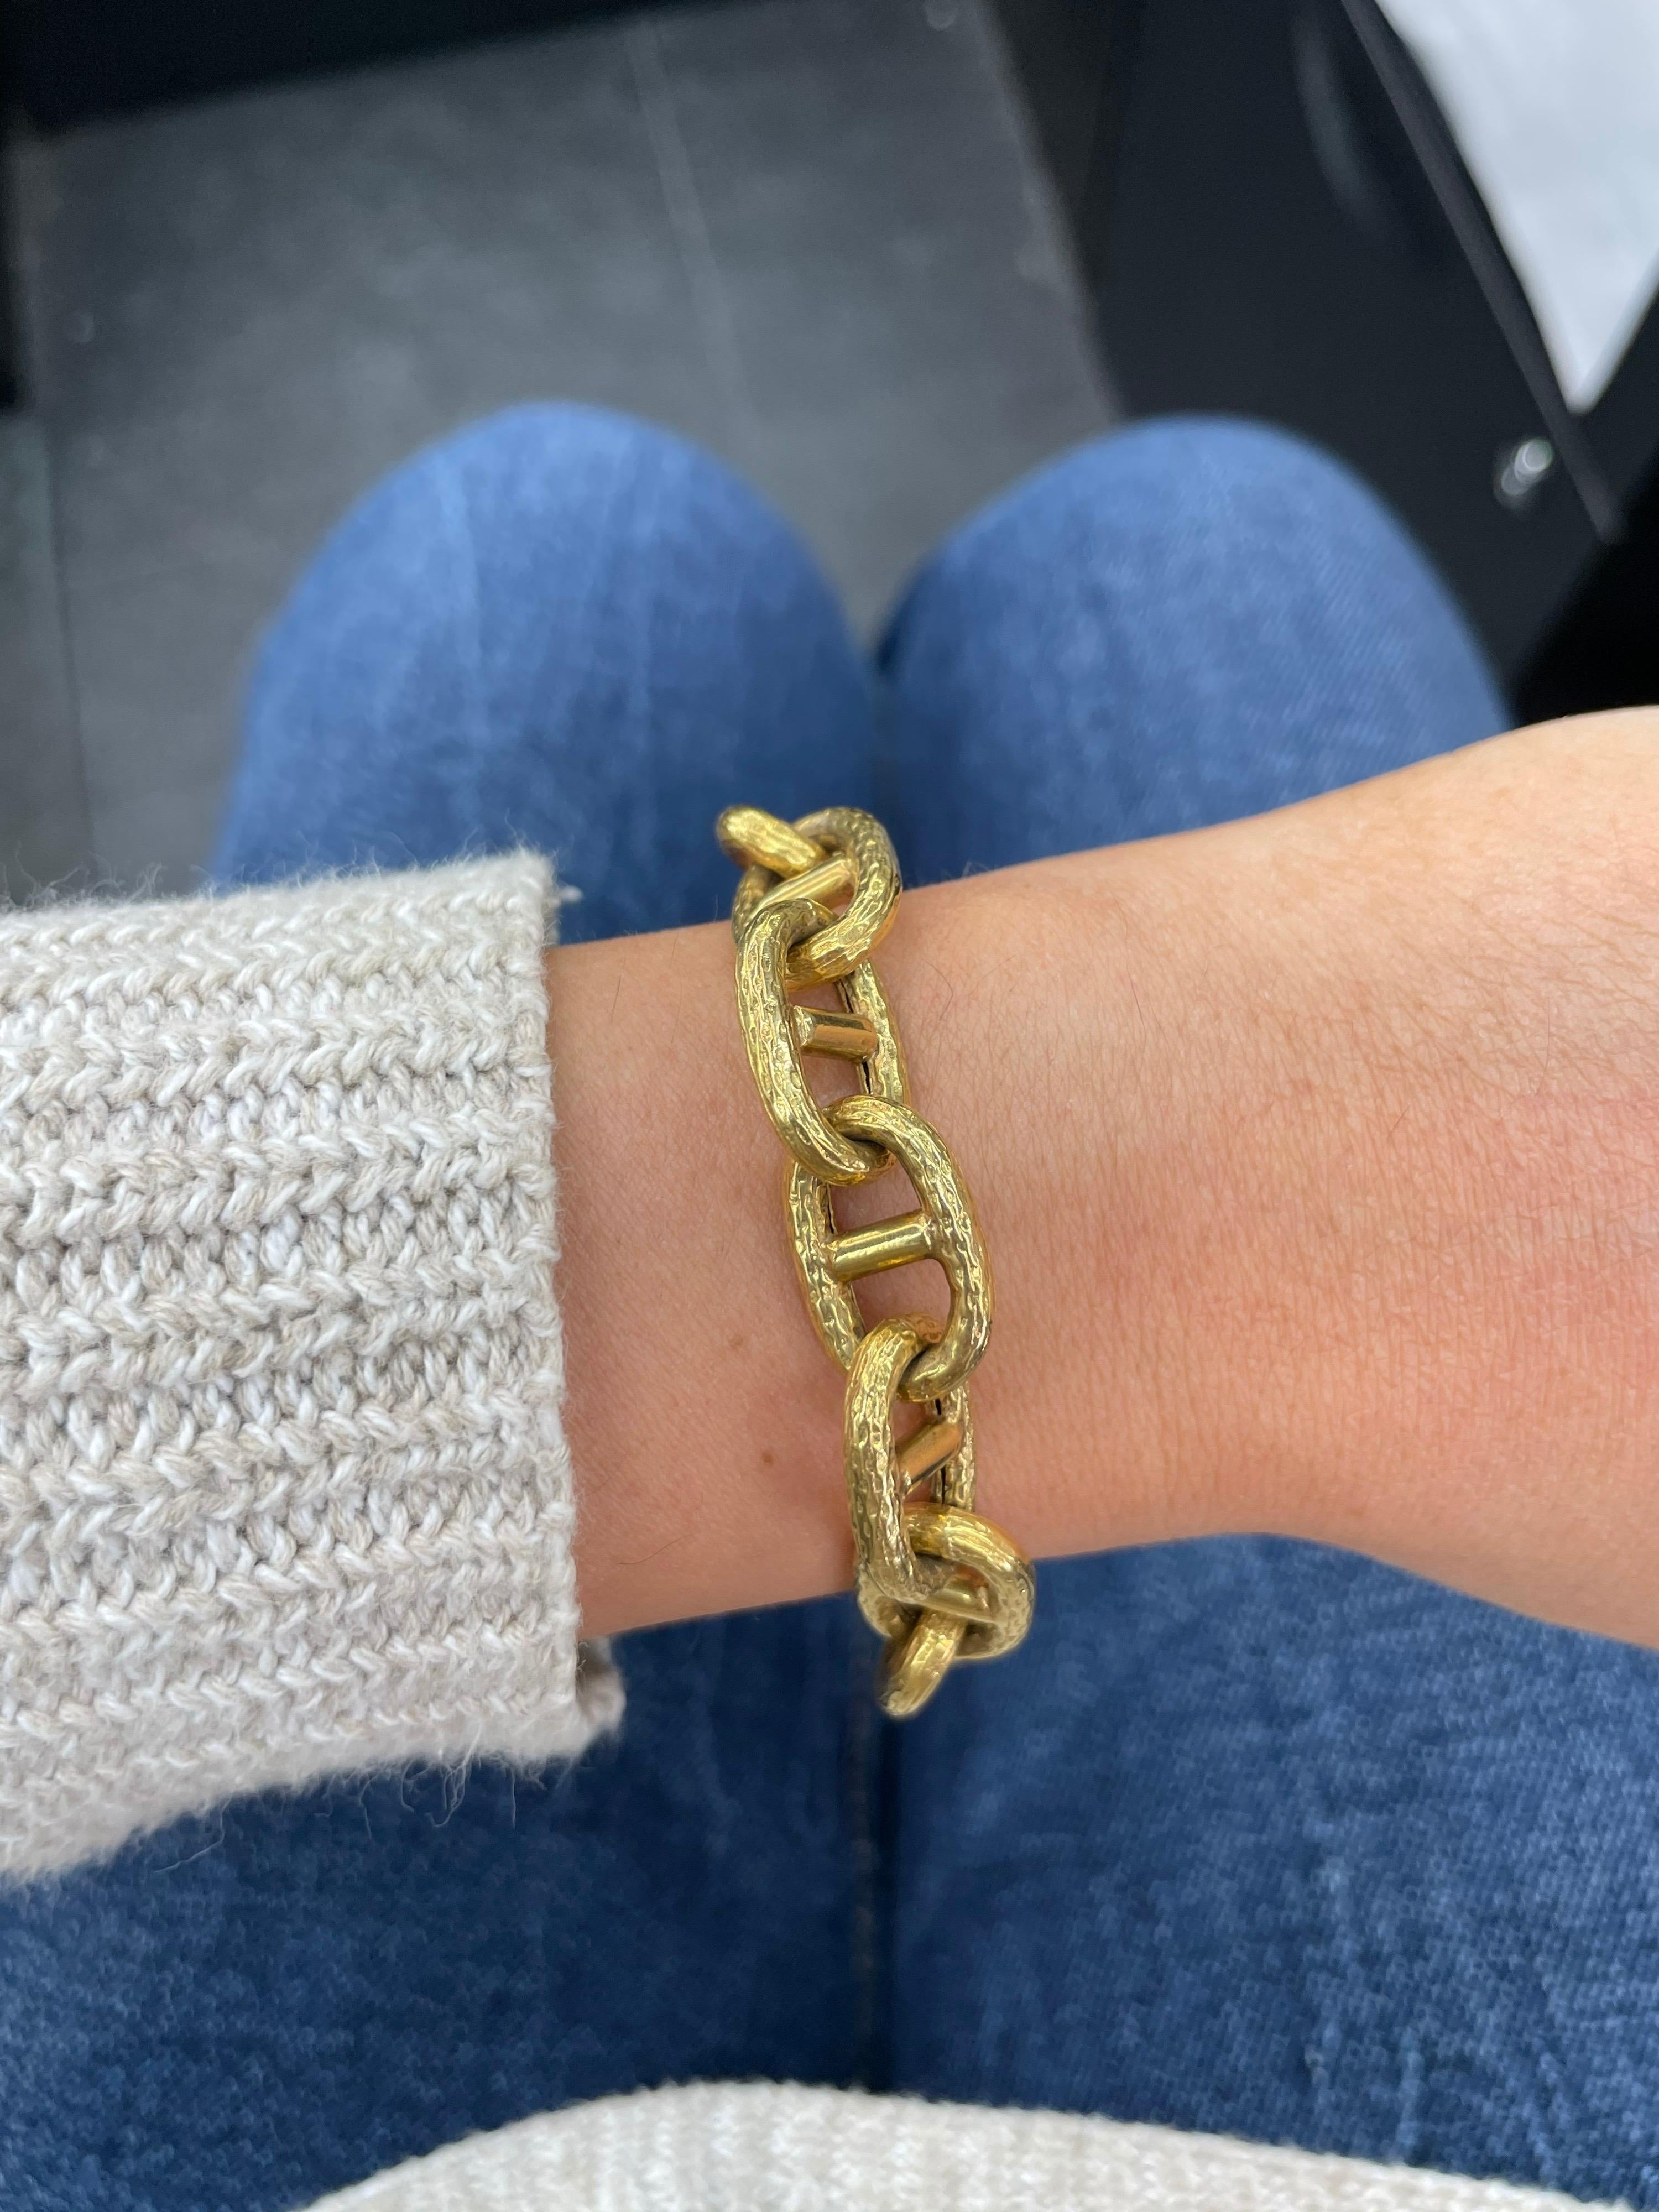 18 Karat Yellow gold bracelet featuring 13 links weighing 32.8 grams.
Each link is 0.75 inches long by 0.50 inches wide
Very fashionable and great for stacking.
Email for more gold bracelets. 